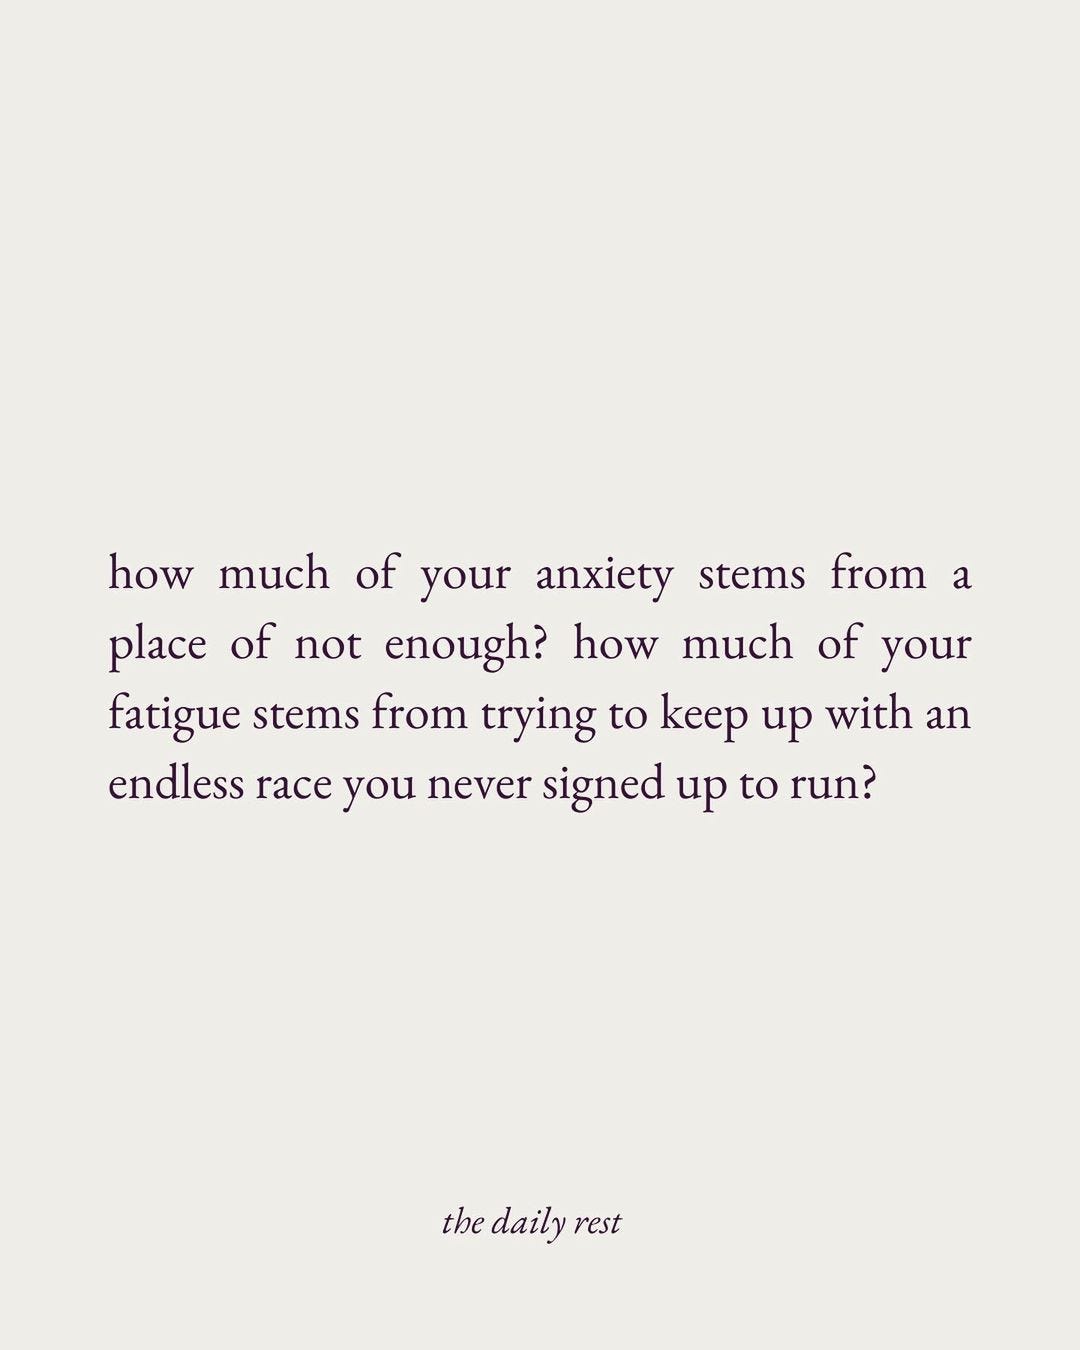 Purple serif font on a tan background that reads, "how much of your anxiety stems from a place of not enough? how much of your fatigue stems from trying to keep up with an endless race you never signed up to run?" - the daily rest